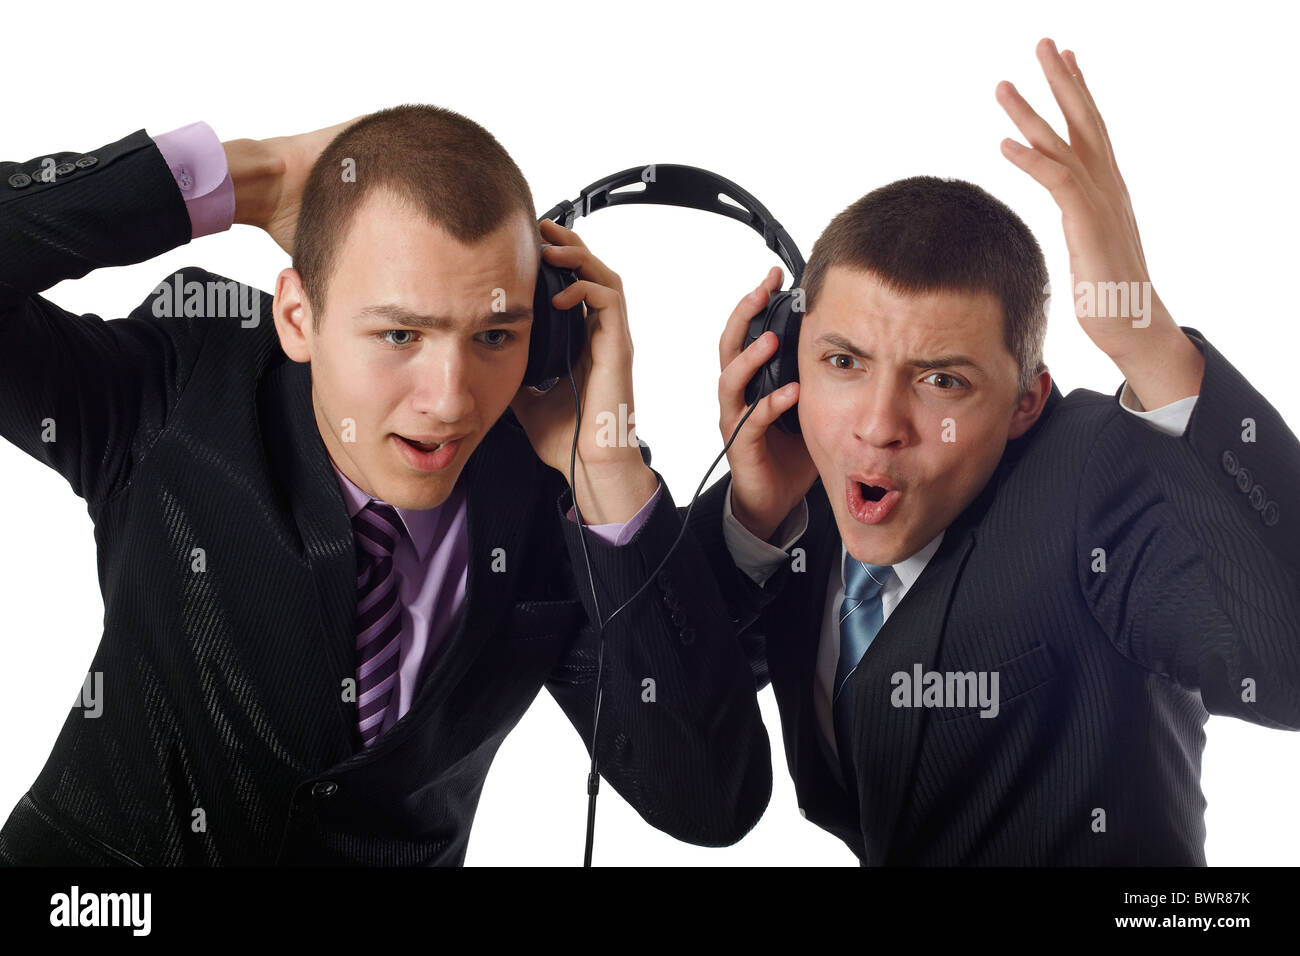 Two young people listening on headphone about something and wondering Stock Photo